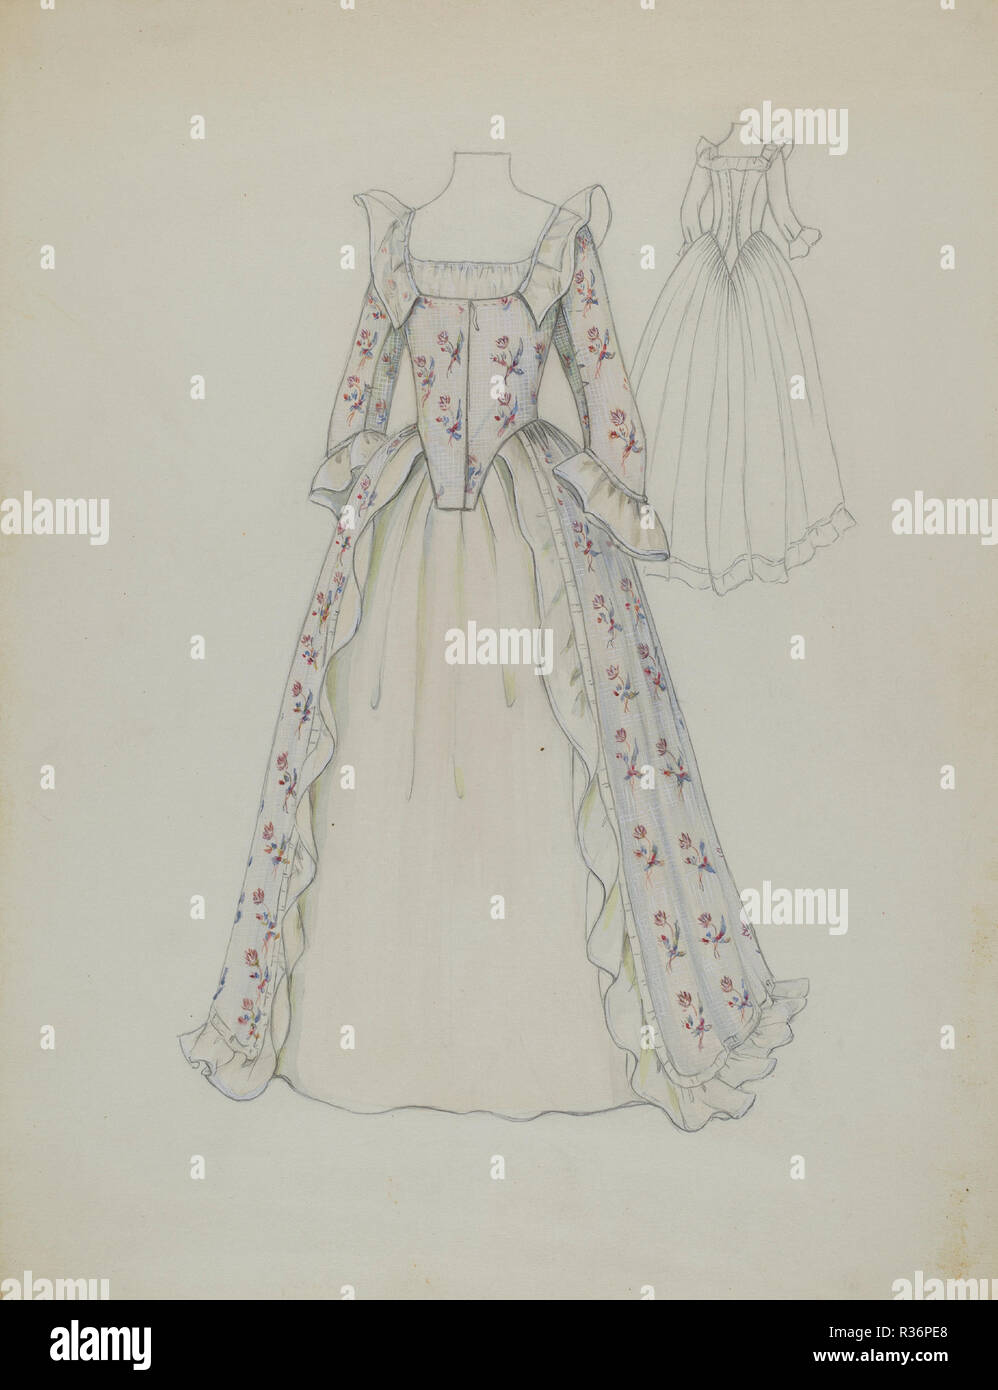 Dress. Dated: c. 1936. Dimensions: overall: 29.8 x 22.7 cm (11 3/4 x 8 15/16 in.). Medium: watercolor, graphite, and gouache on paperboard. Museum: National Gallery of Art, Washington DC. Author: Jessie M. Benge. Stock Photo